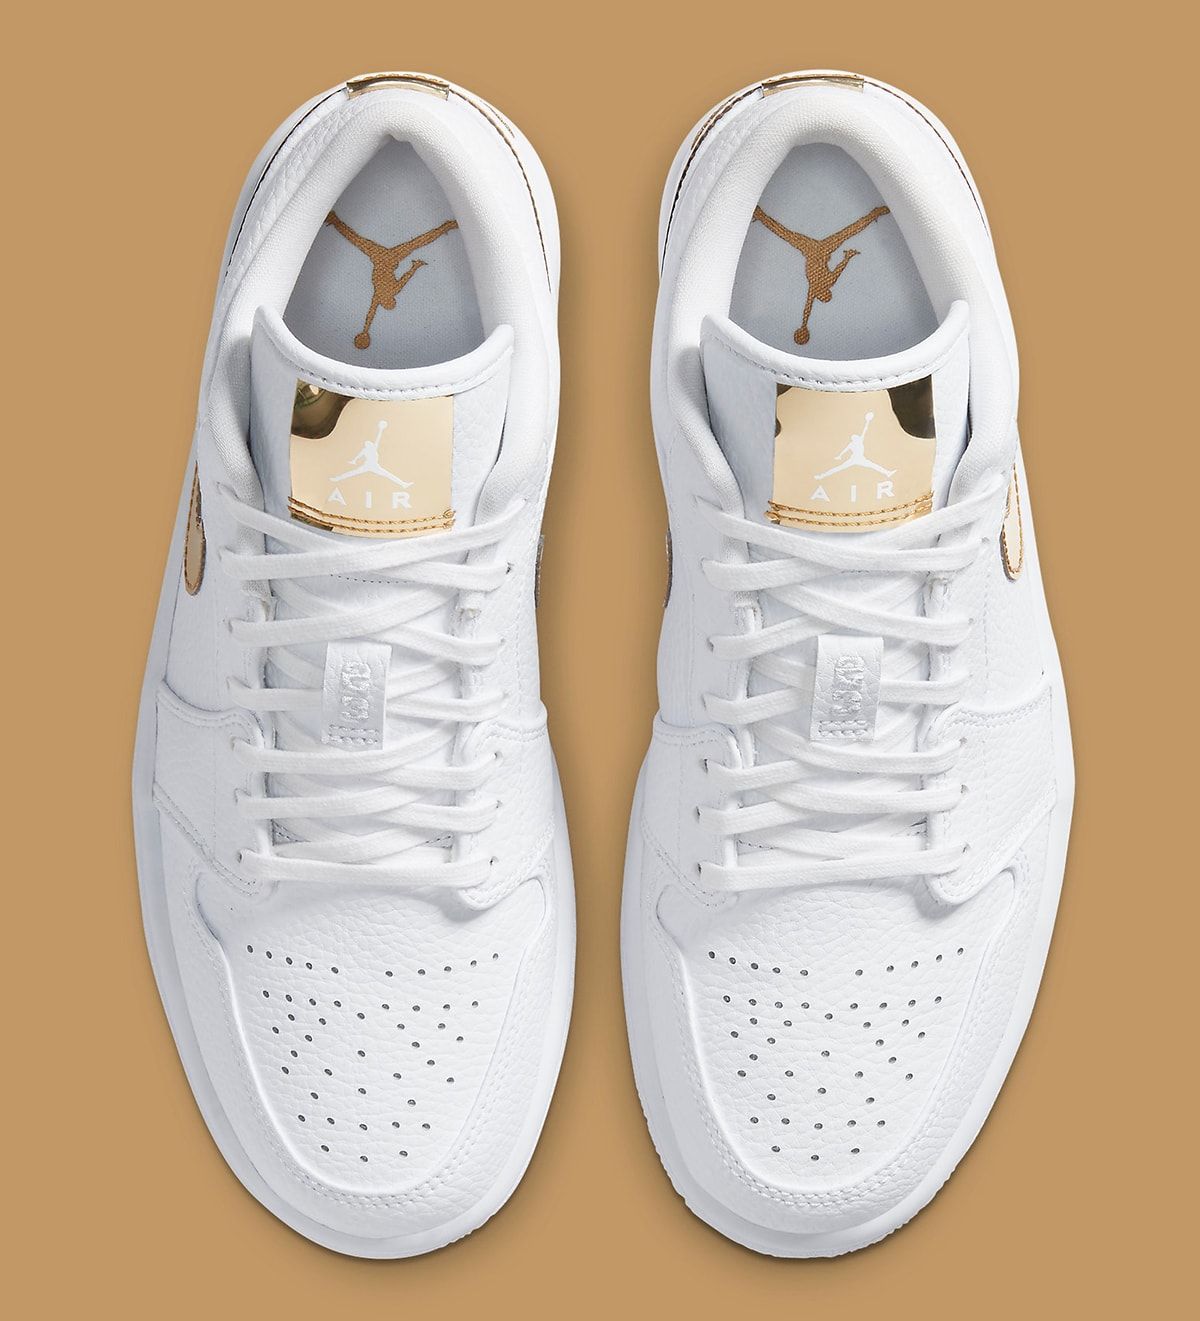 white and gold air jordans